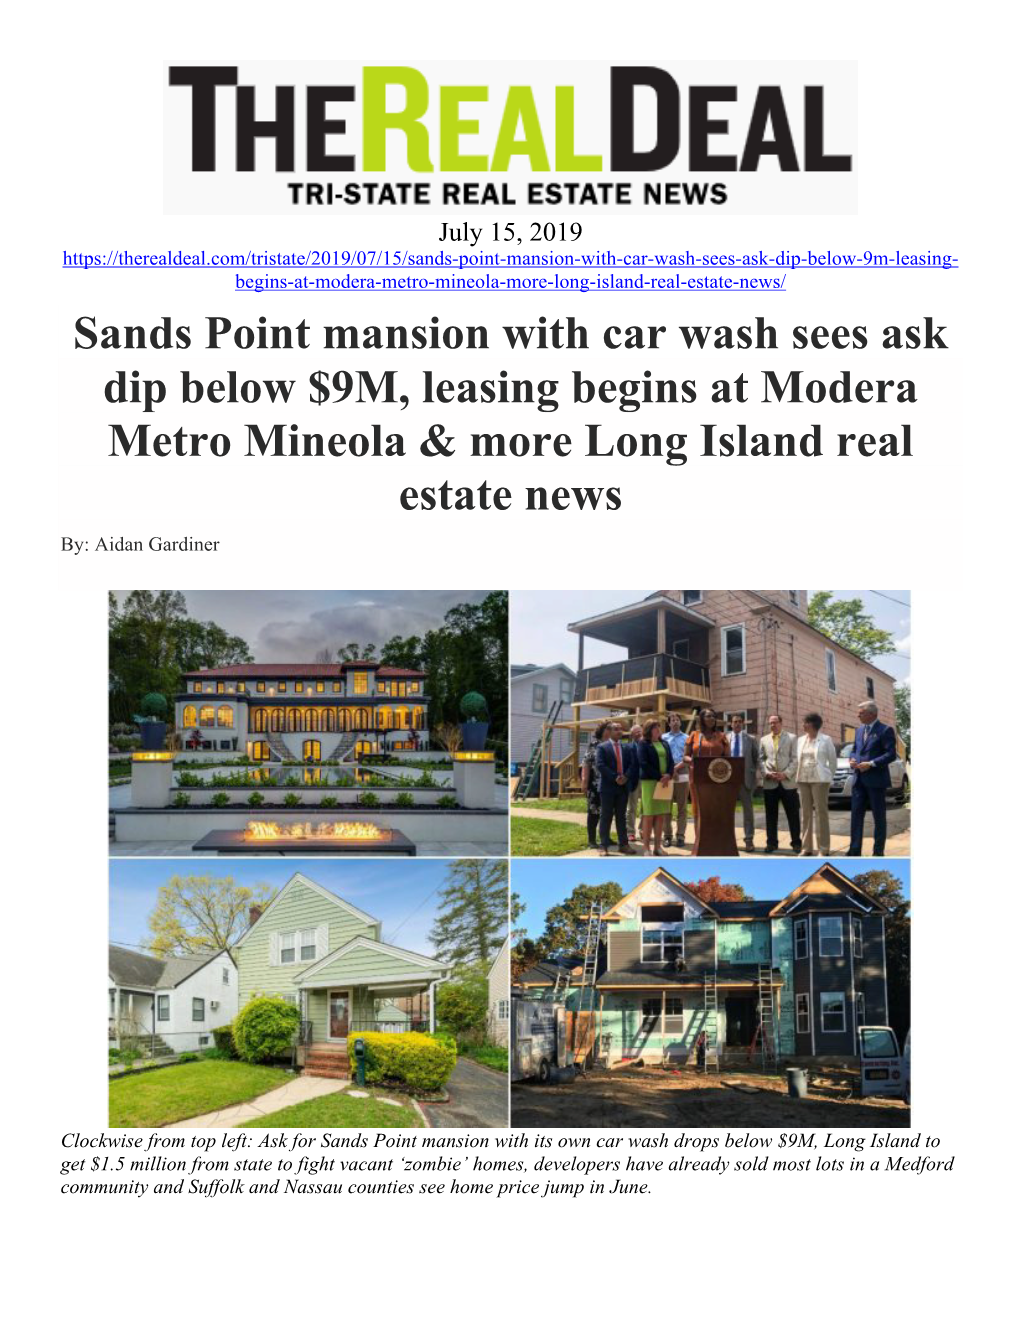 Sands Point Mansion with Car Wash Sees Ask Dip Below $9M, Leasing Begins at Modera Metro Mineola & More Long Island Real Estate News By: Aidan Gardiner